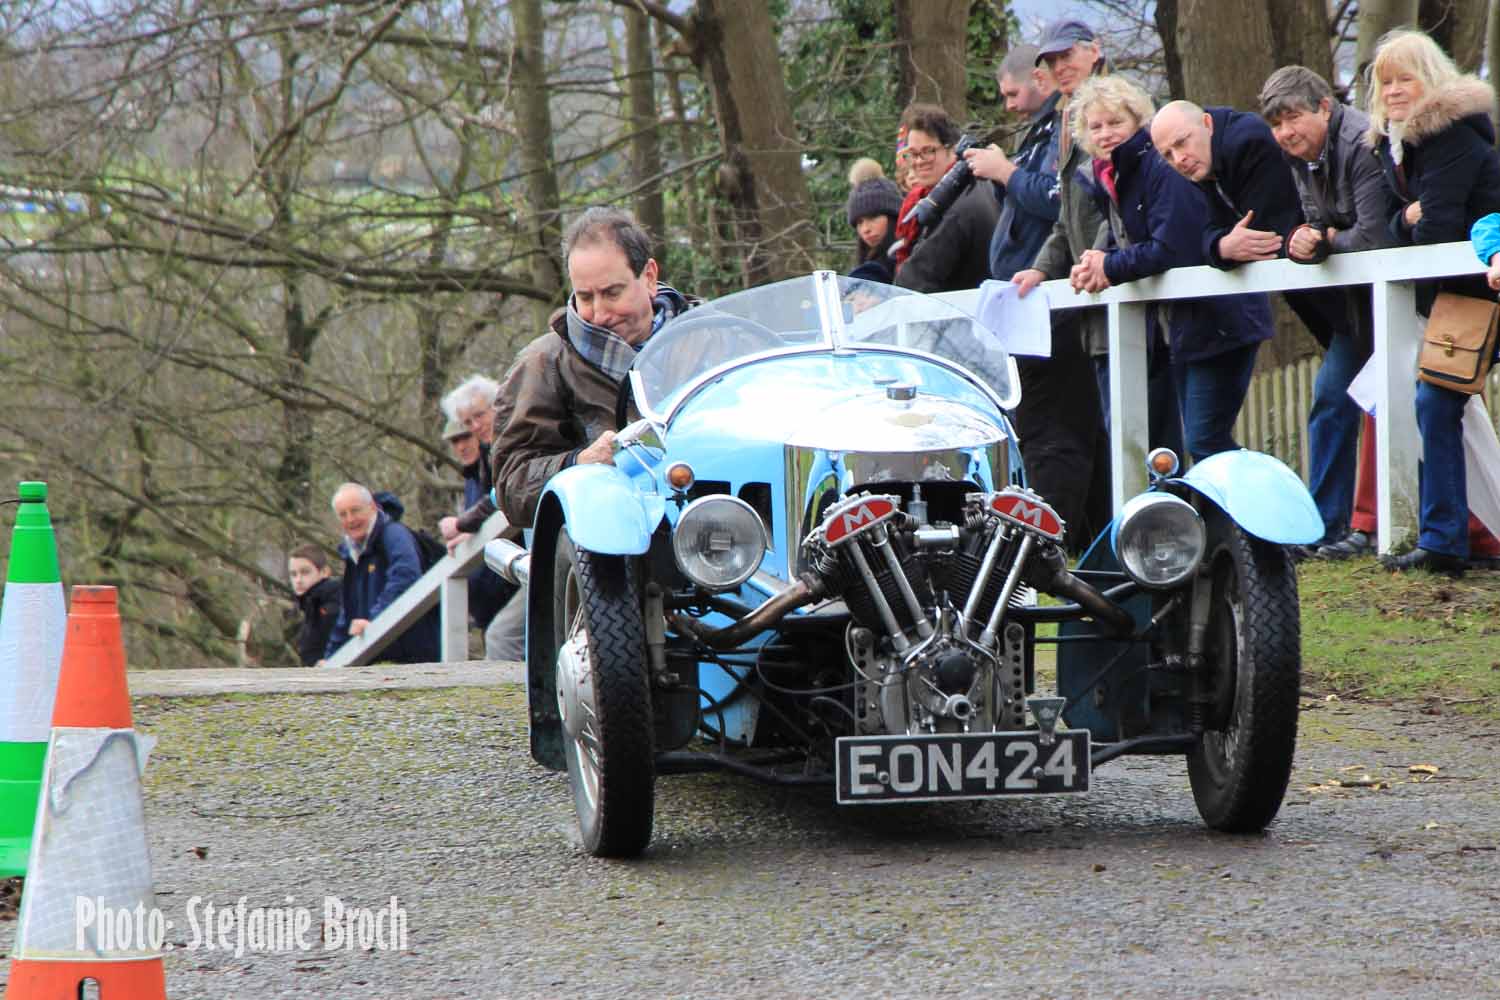 Don’t miss the traditional VSCC New Year Driving Tests at Brooklands this weekend cover